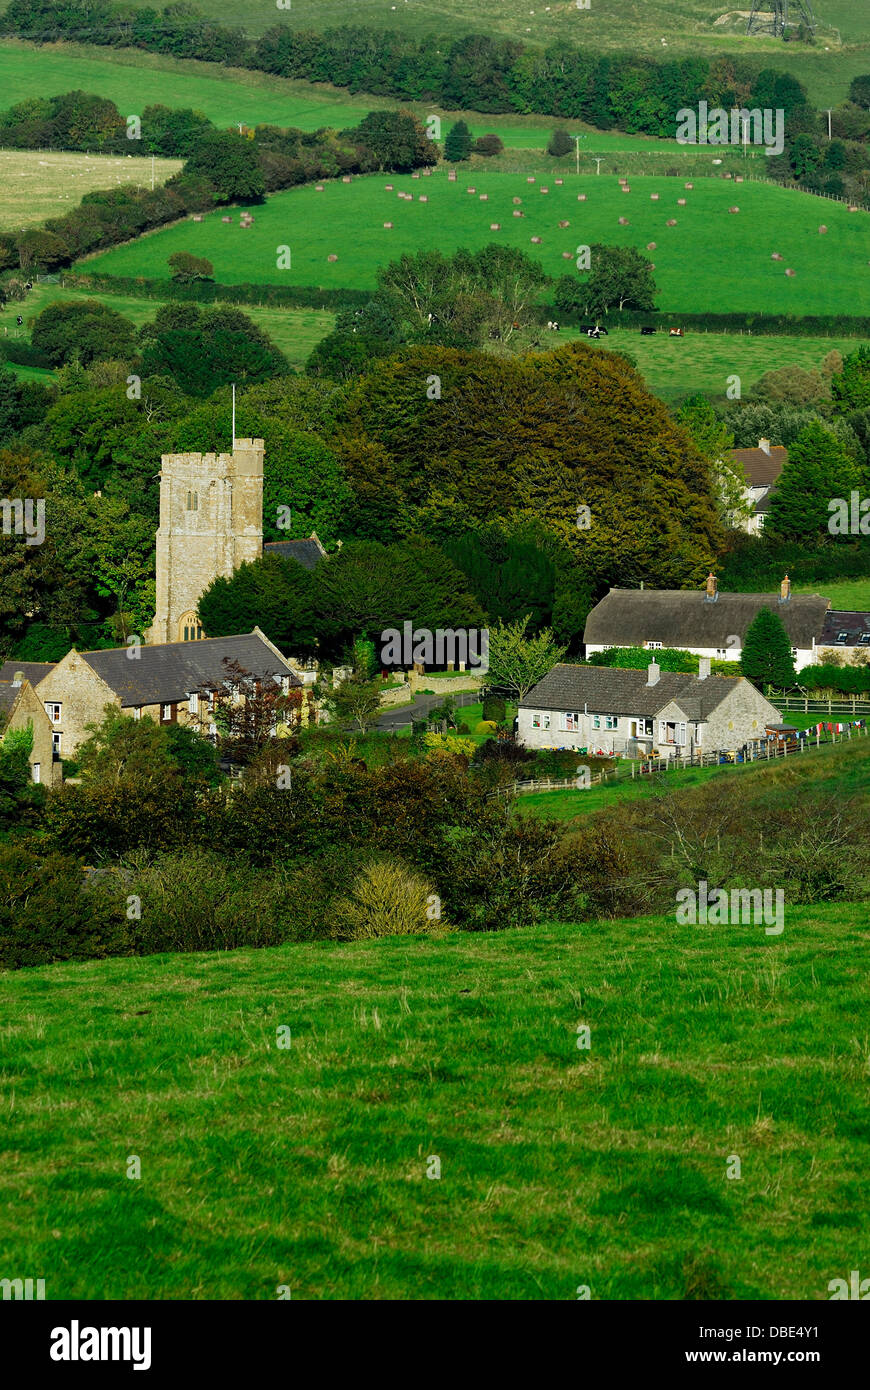 A view of Askerswell, a rural Dorset village surrounded by farmland UK Stock Photo